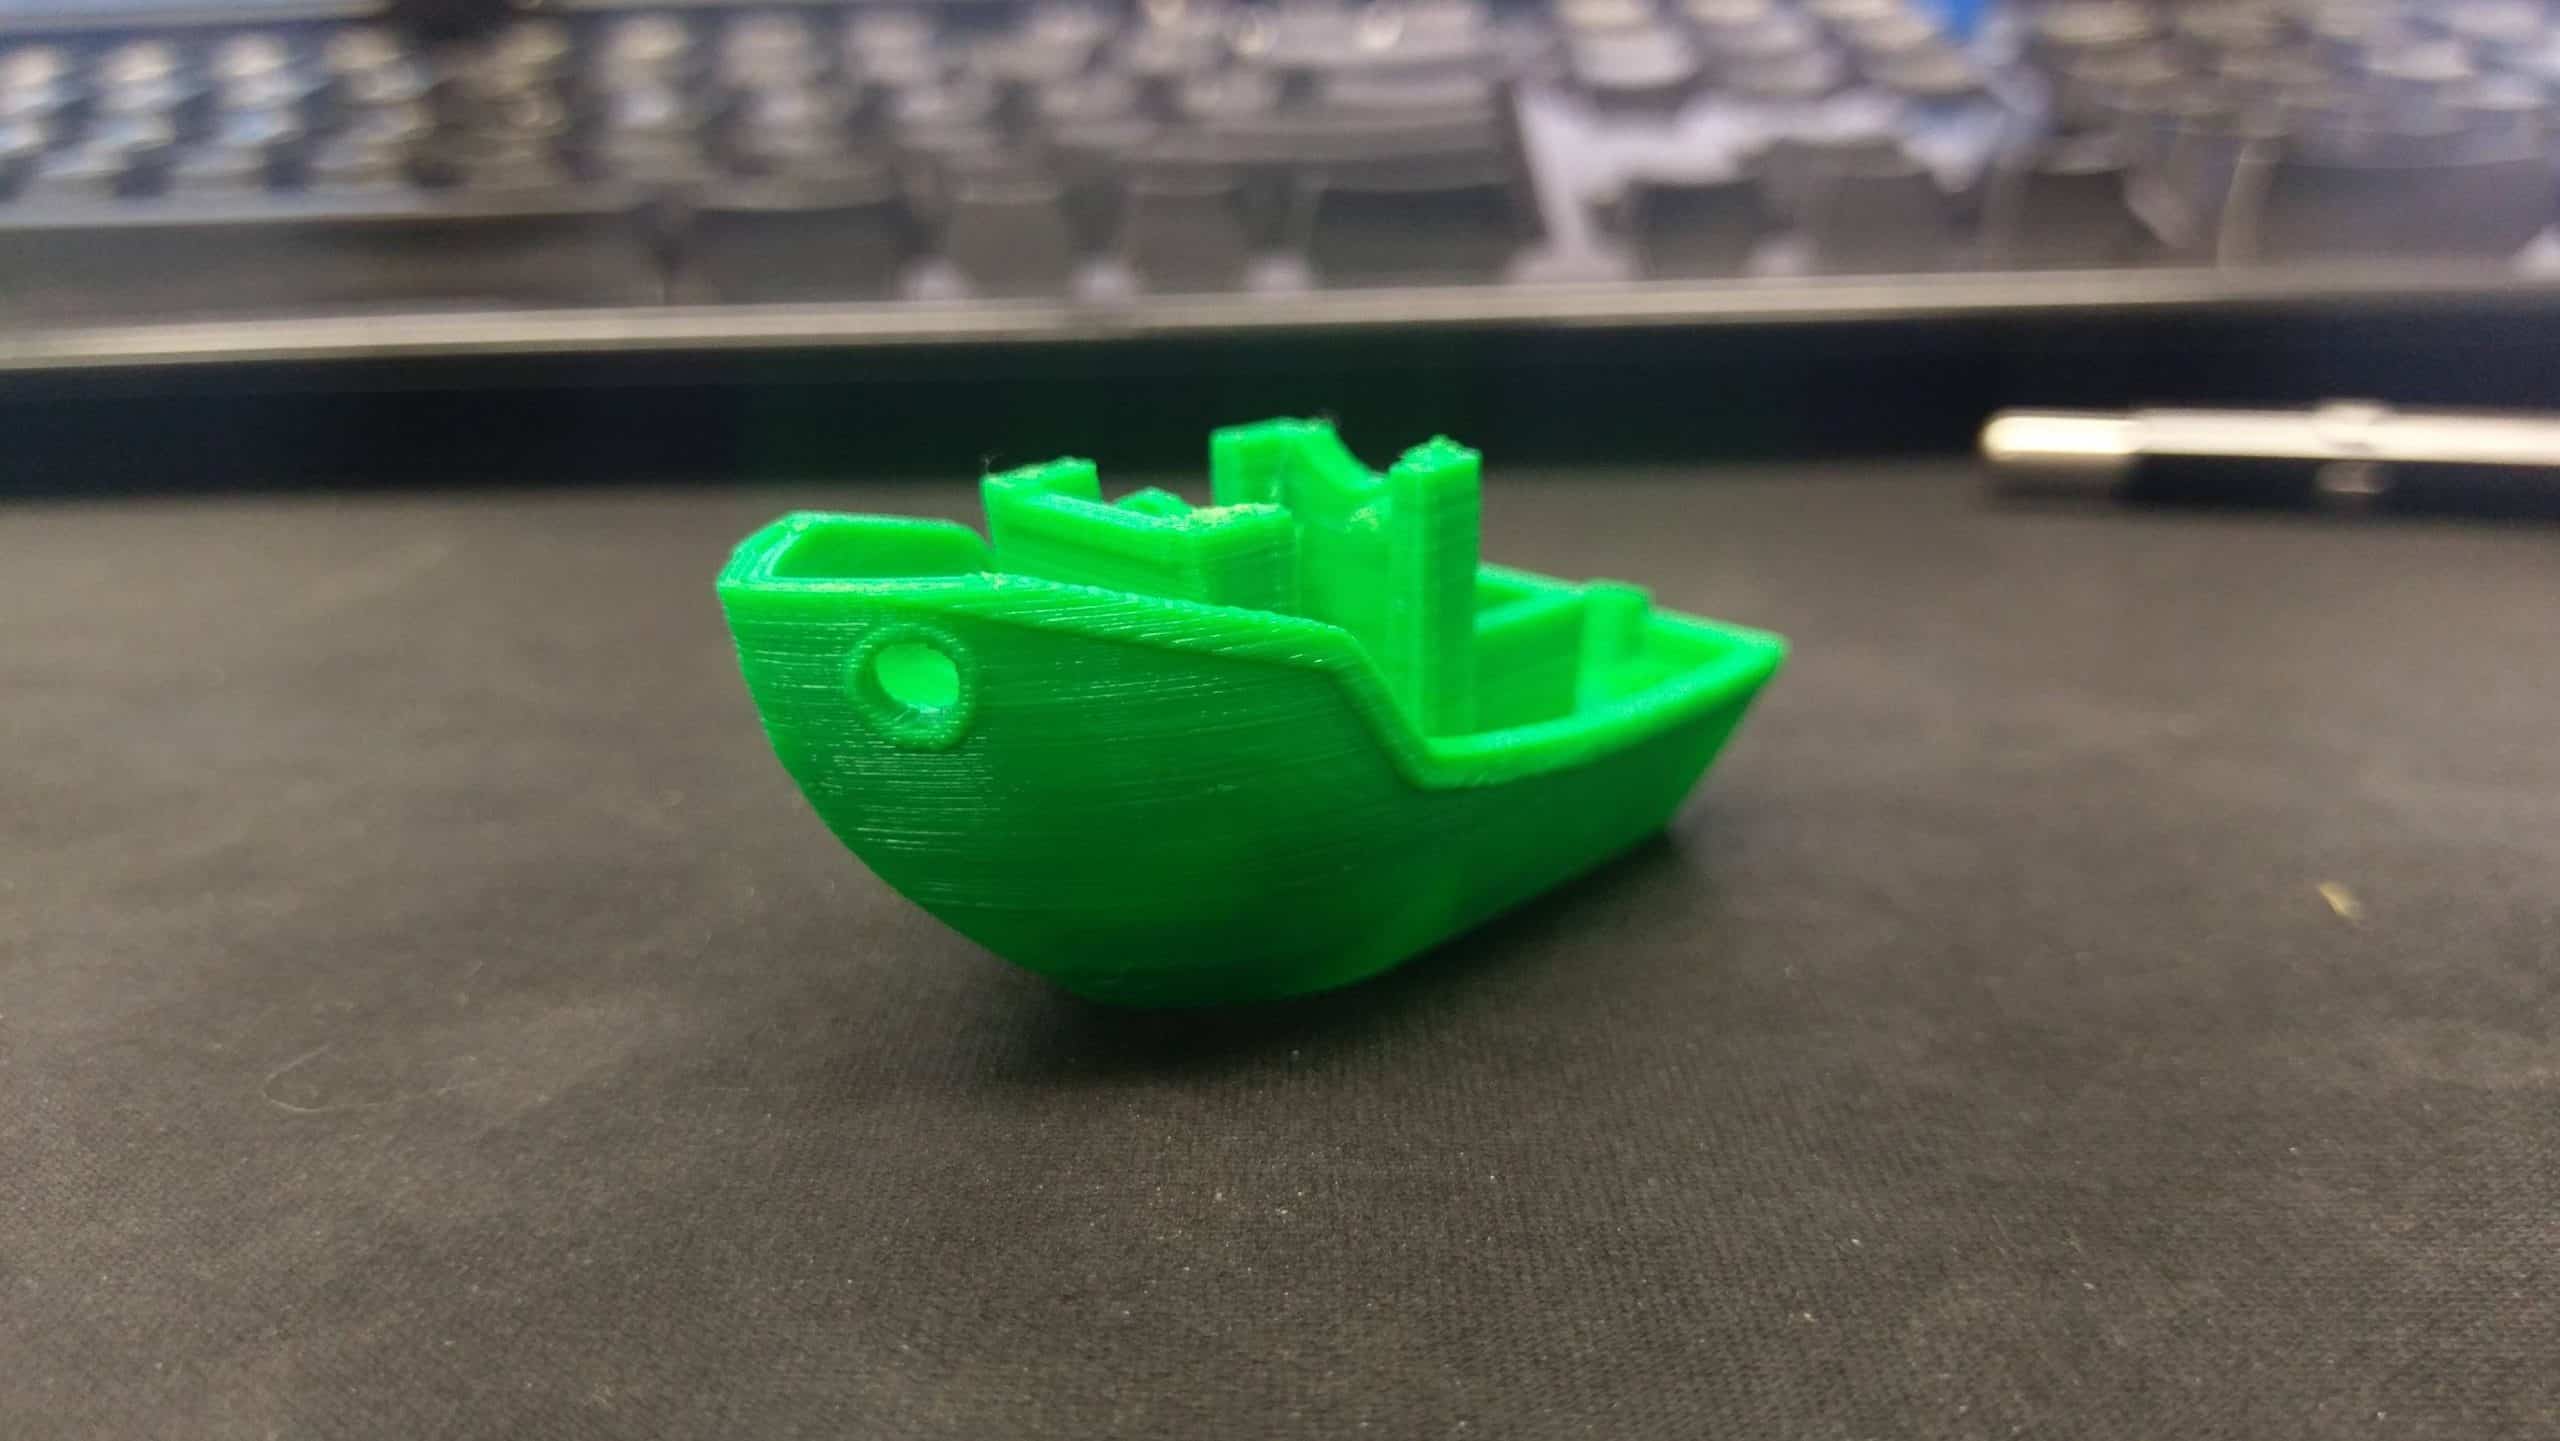 3d print stopped halfway